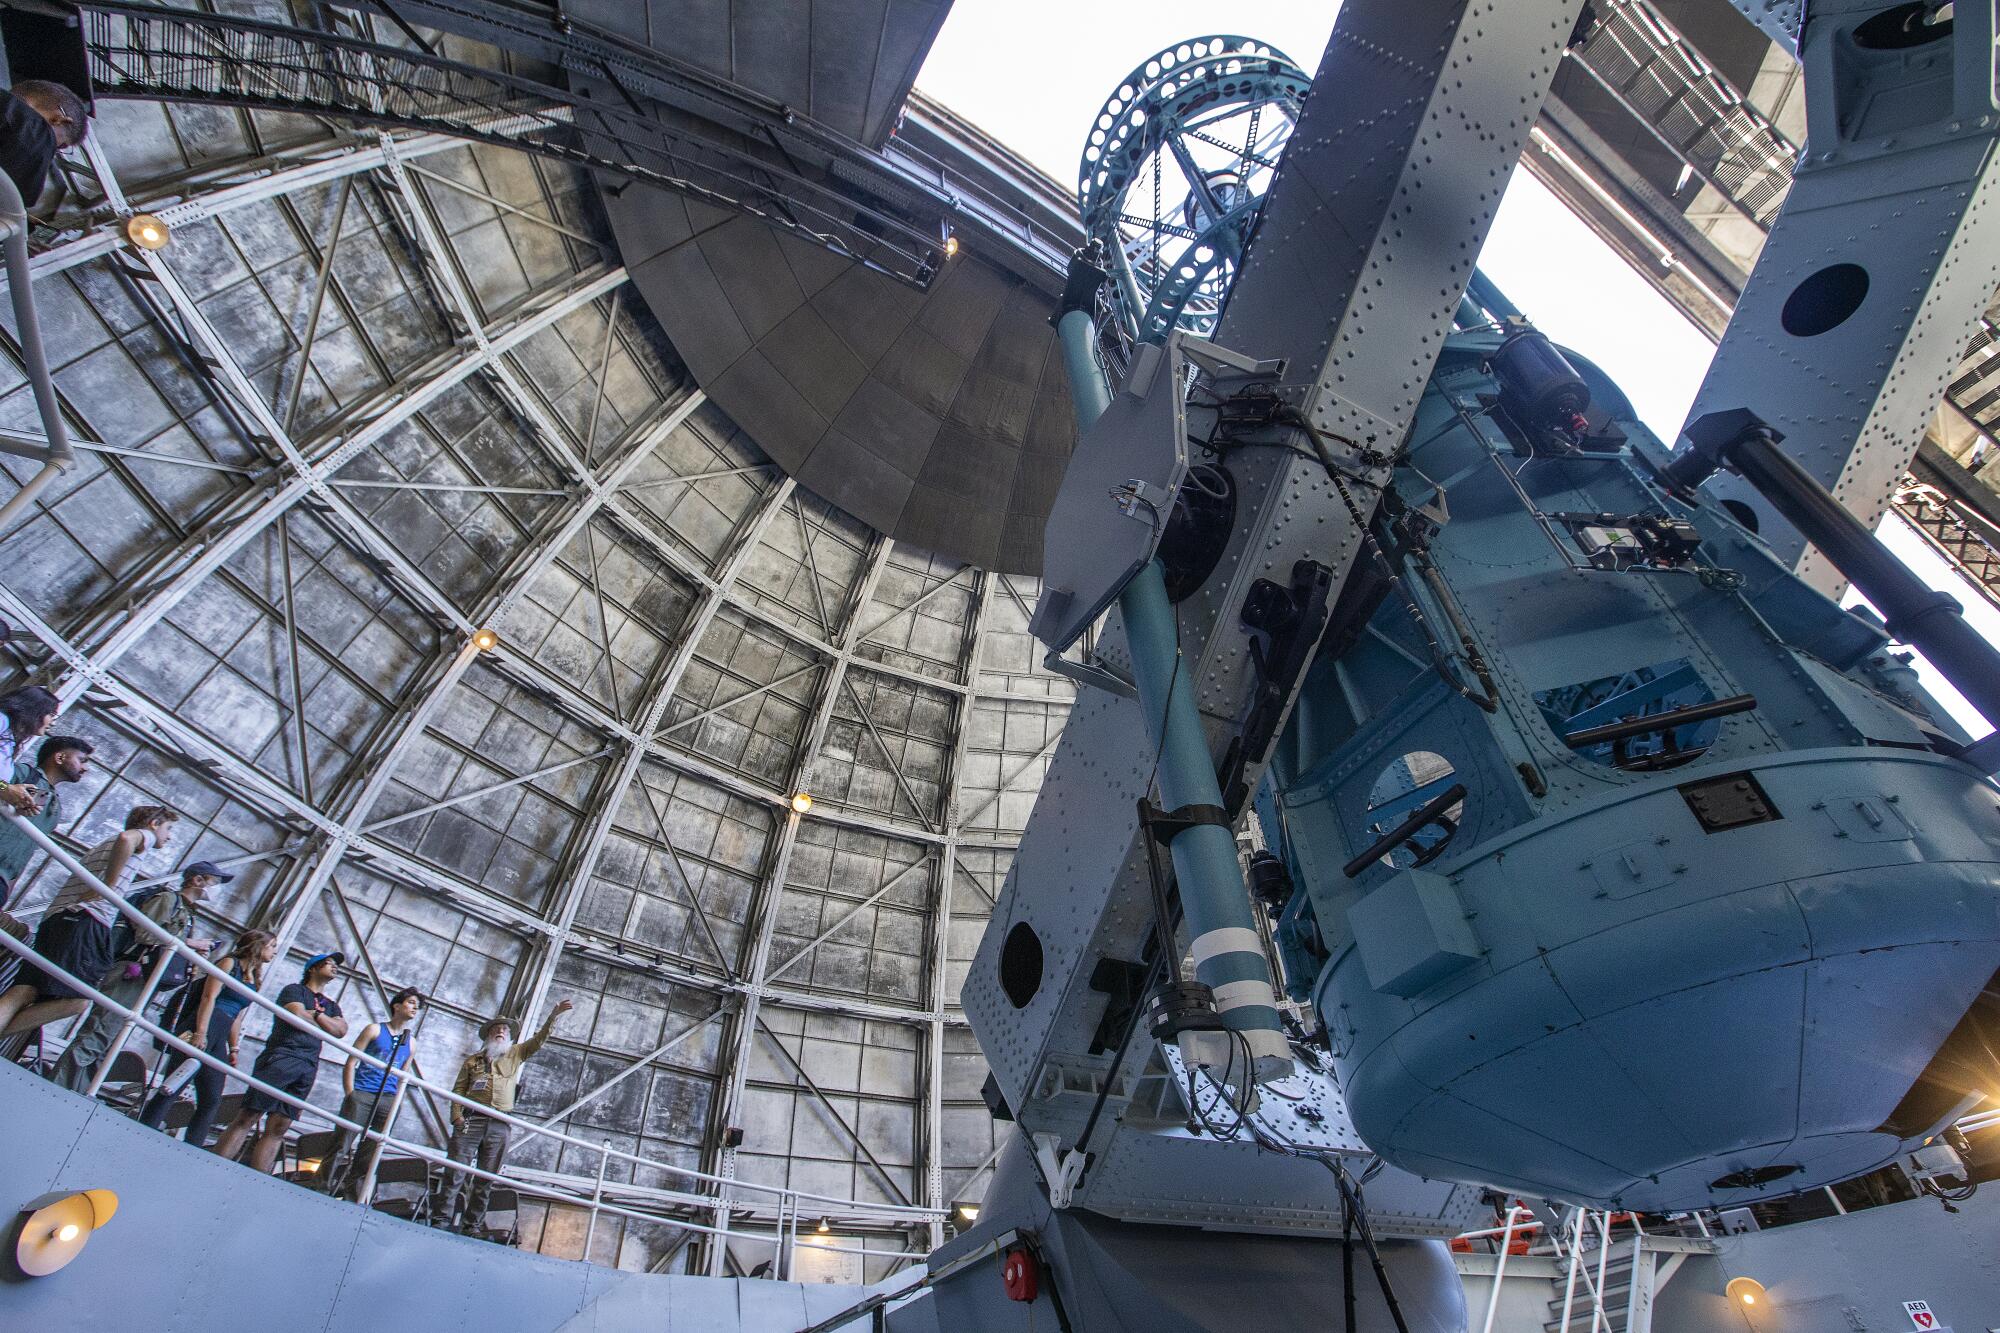 Docent Tim Thompson, right, gives students from USC a tour inside the 100-inch telescope at Mt. Wilson Observatory. 